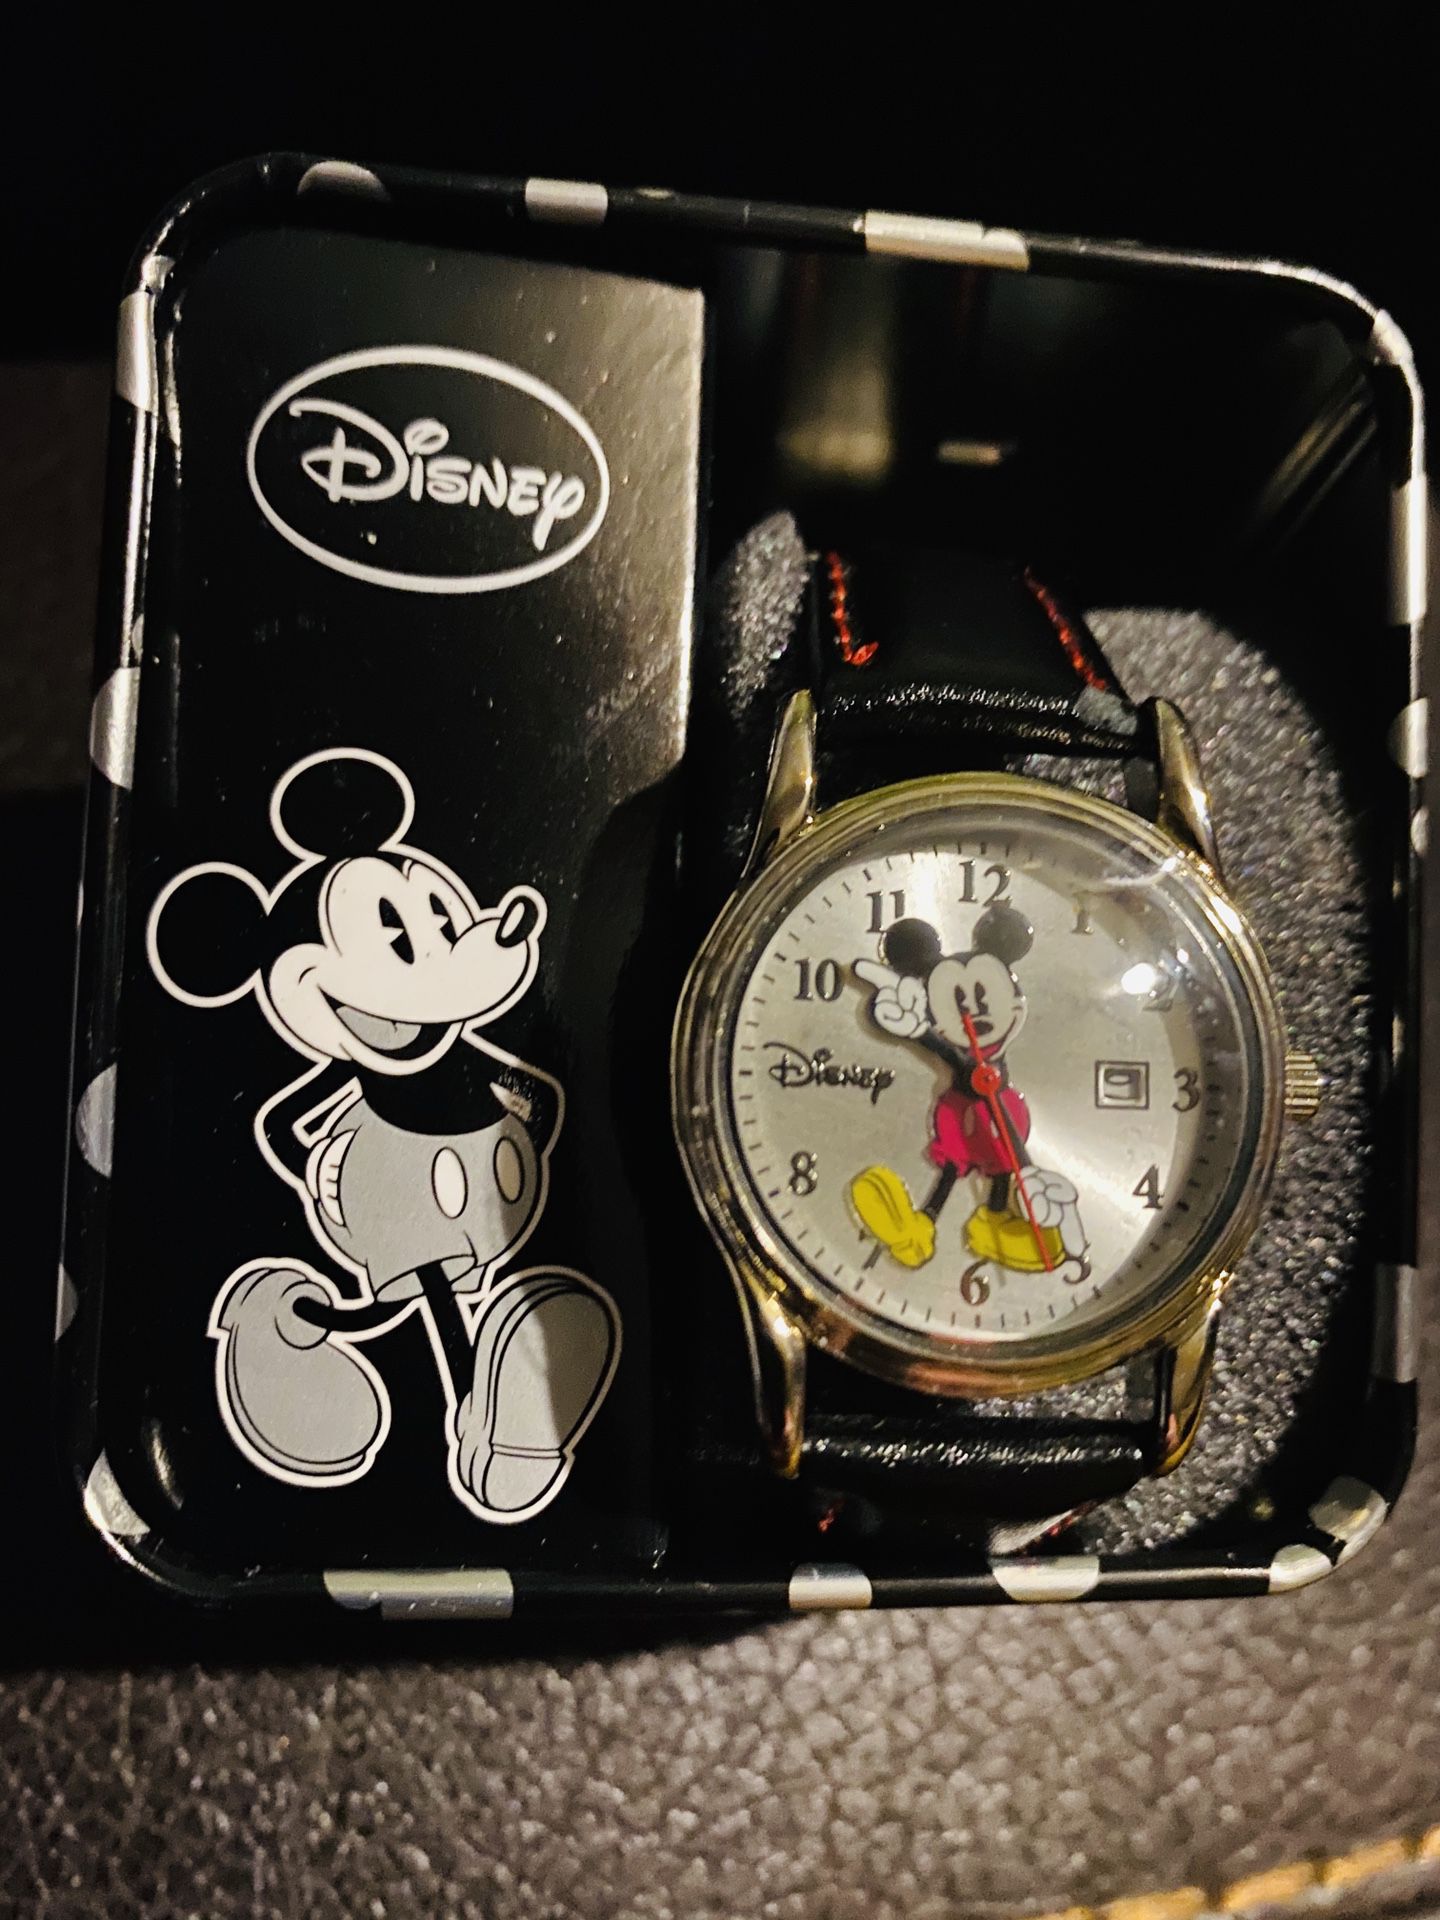 Very nice watch Disney Mickey Mouse new never used